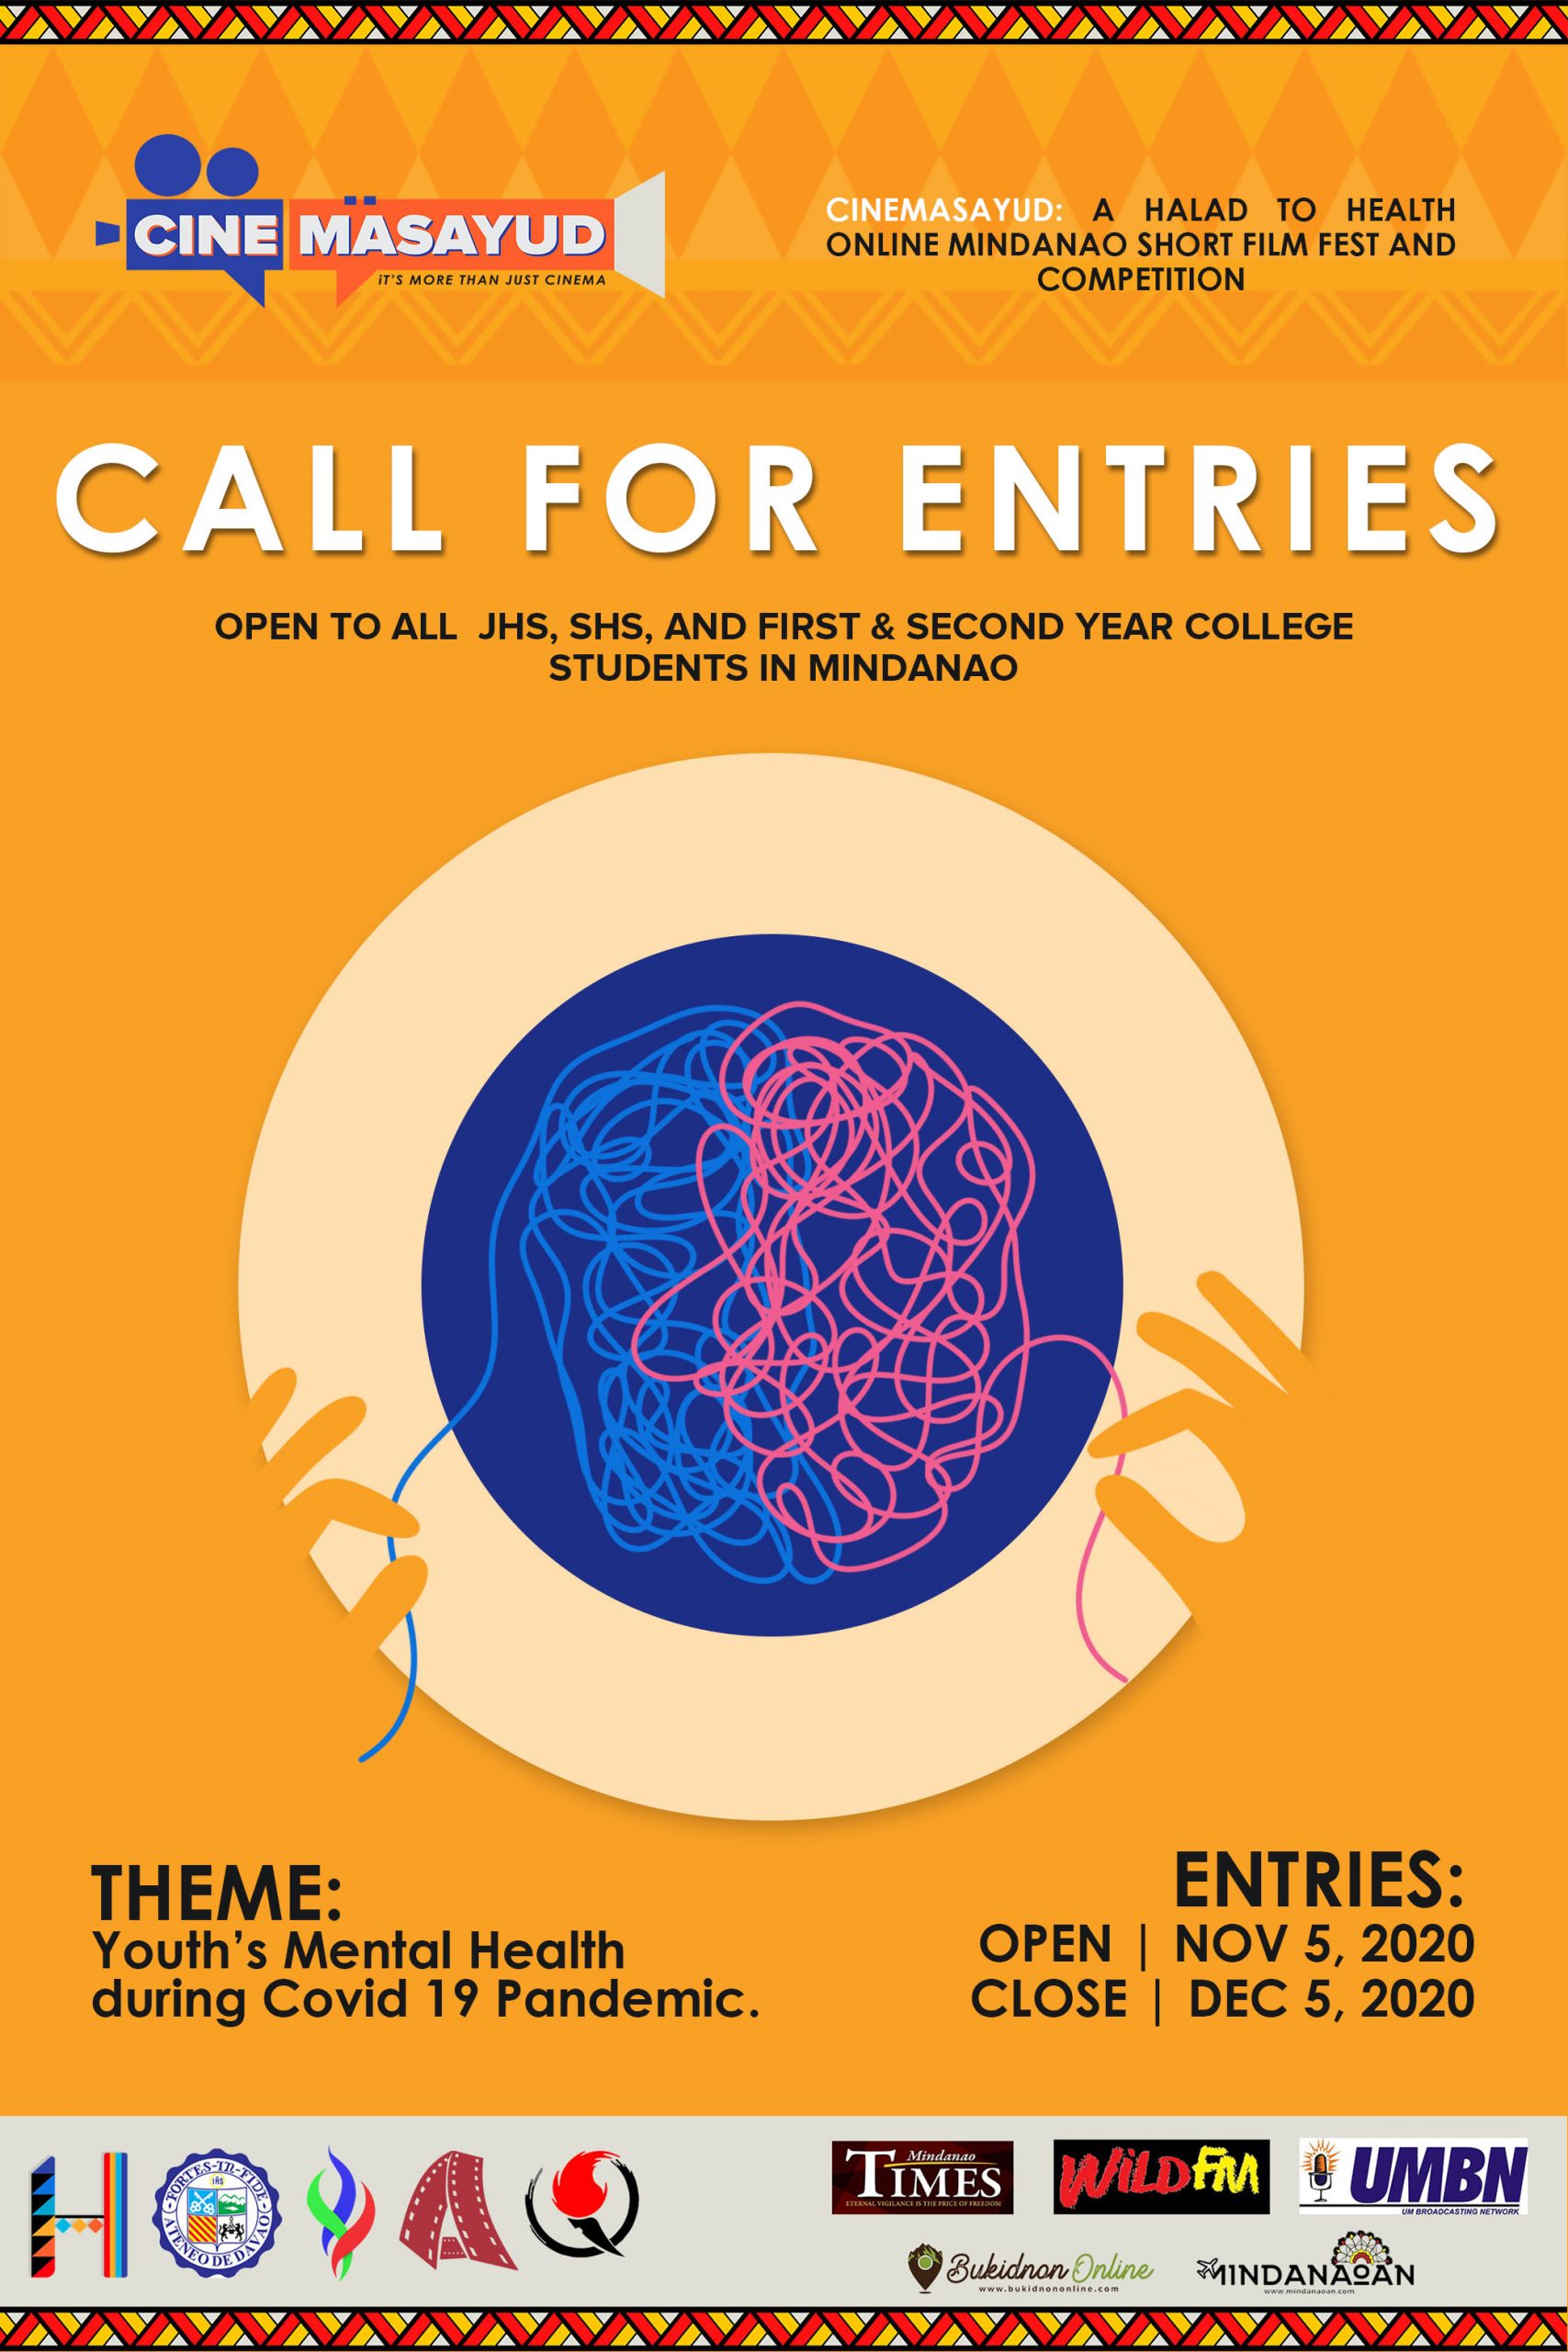 Call for Entries: CineMasayud - A Halad to Health Online Mindanao Short Film Fest and Competition